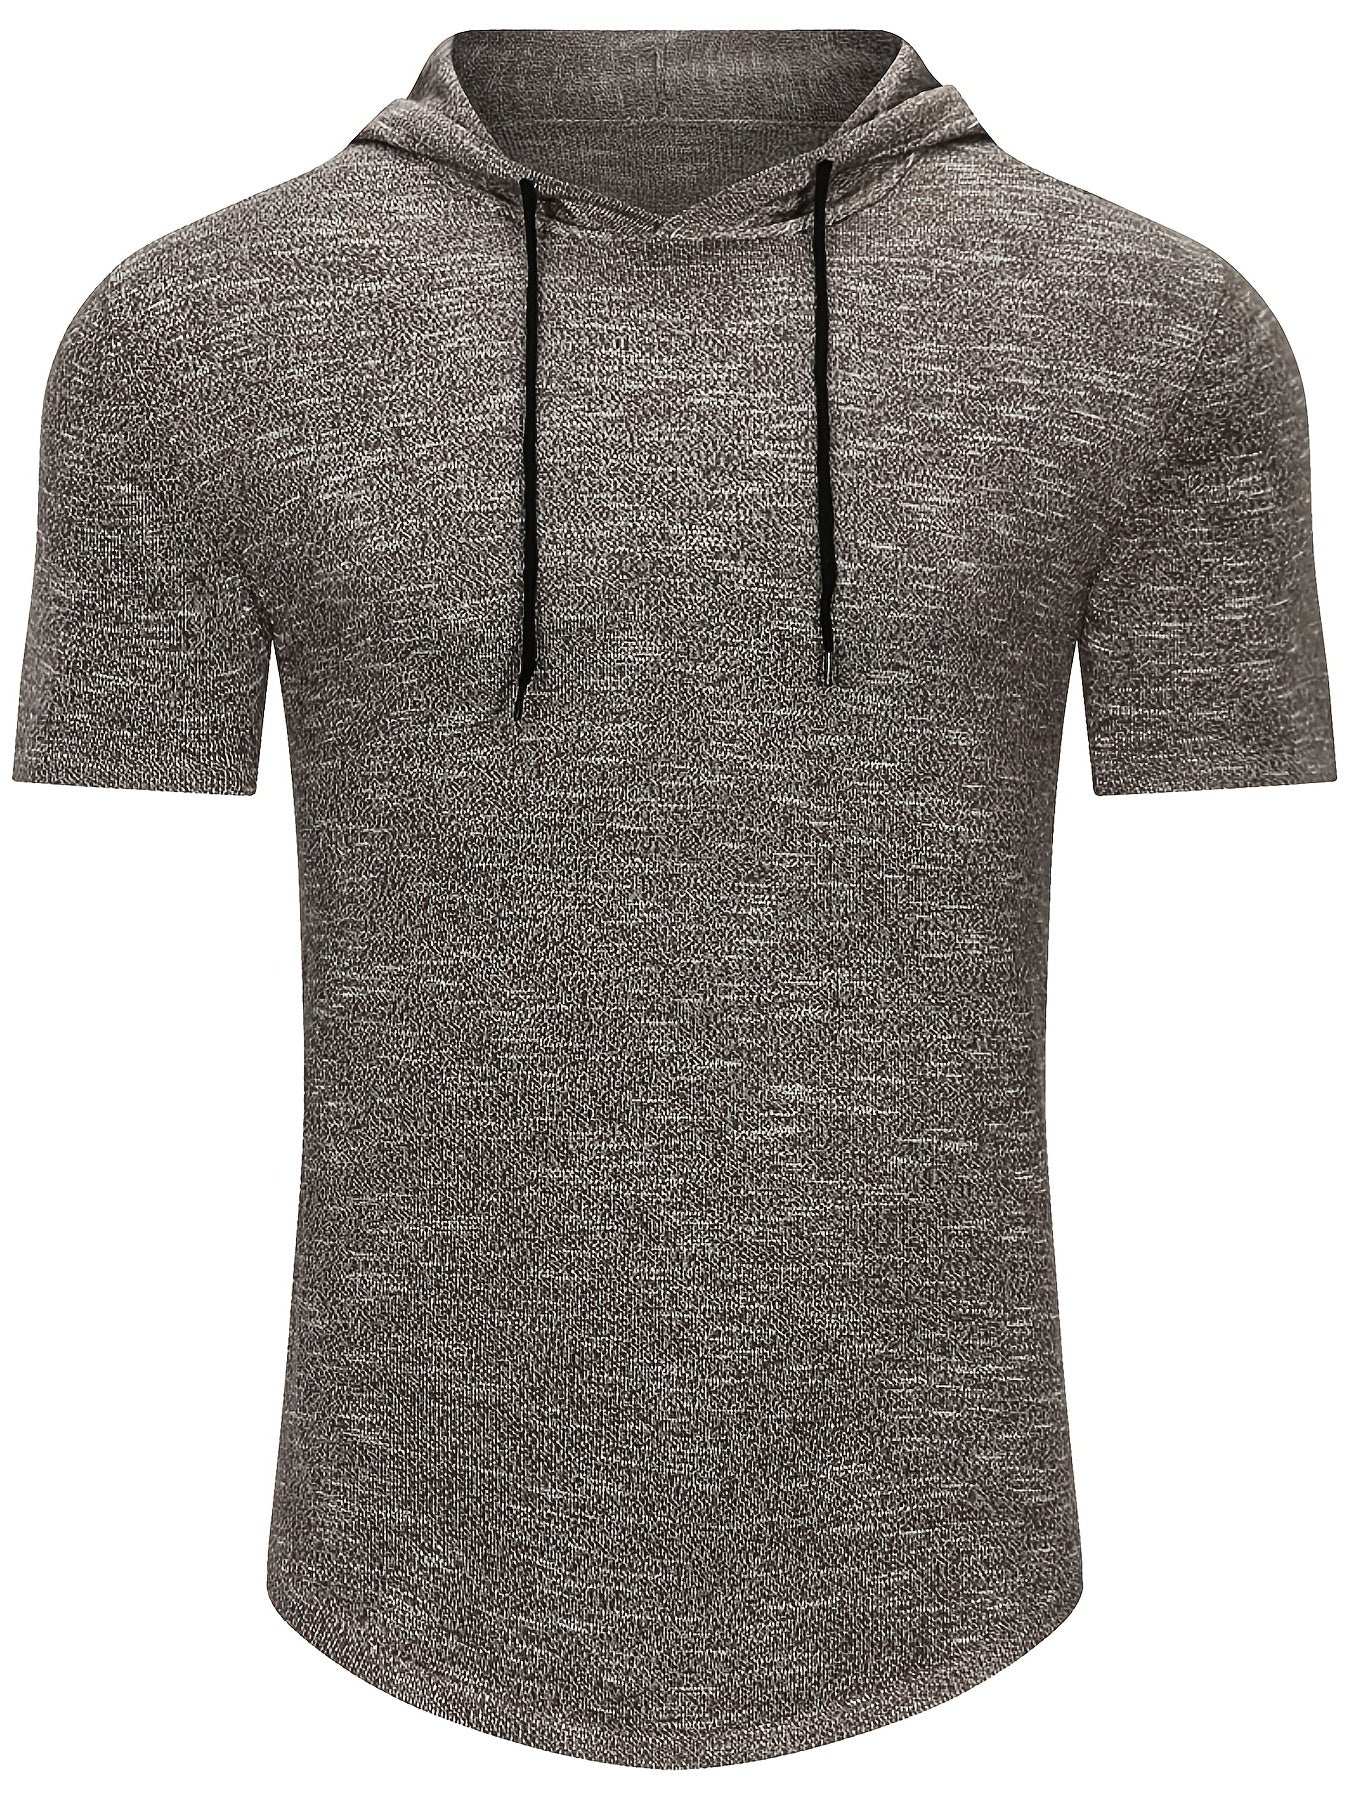 Men's Knit Top Casual Short Sleeve Breathable Hooded T-Shirts